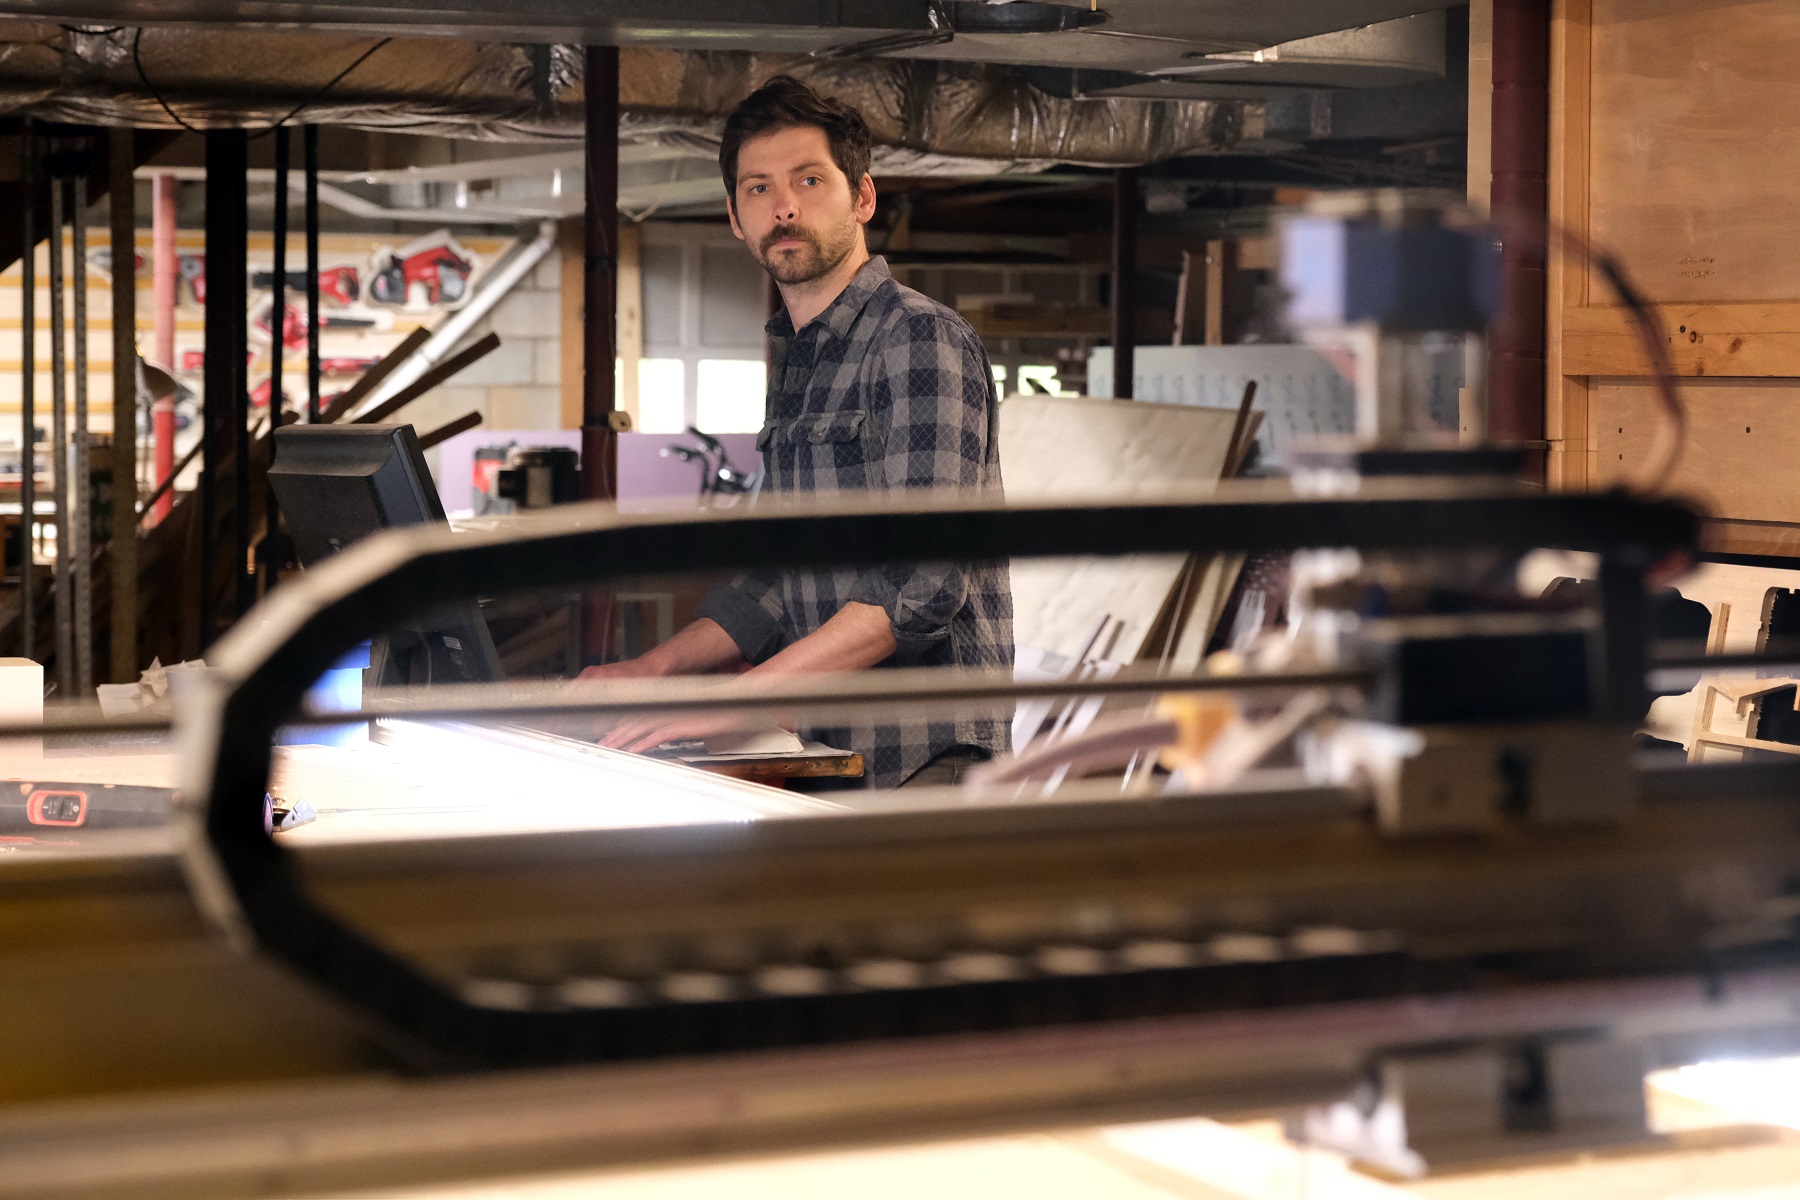 Matthew Steele is using his ASC fellowship to add capacity to use a variety of materials and tools for commissions. This is the CNC router in his home studio. Photo by Nancy Pierce.